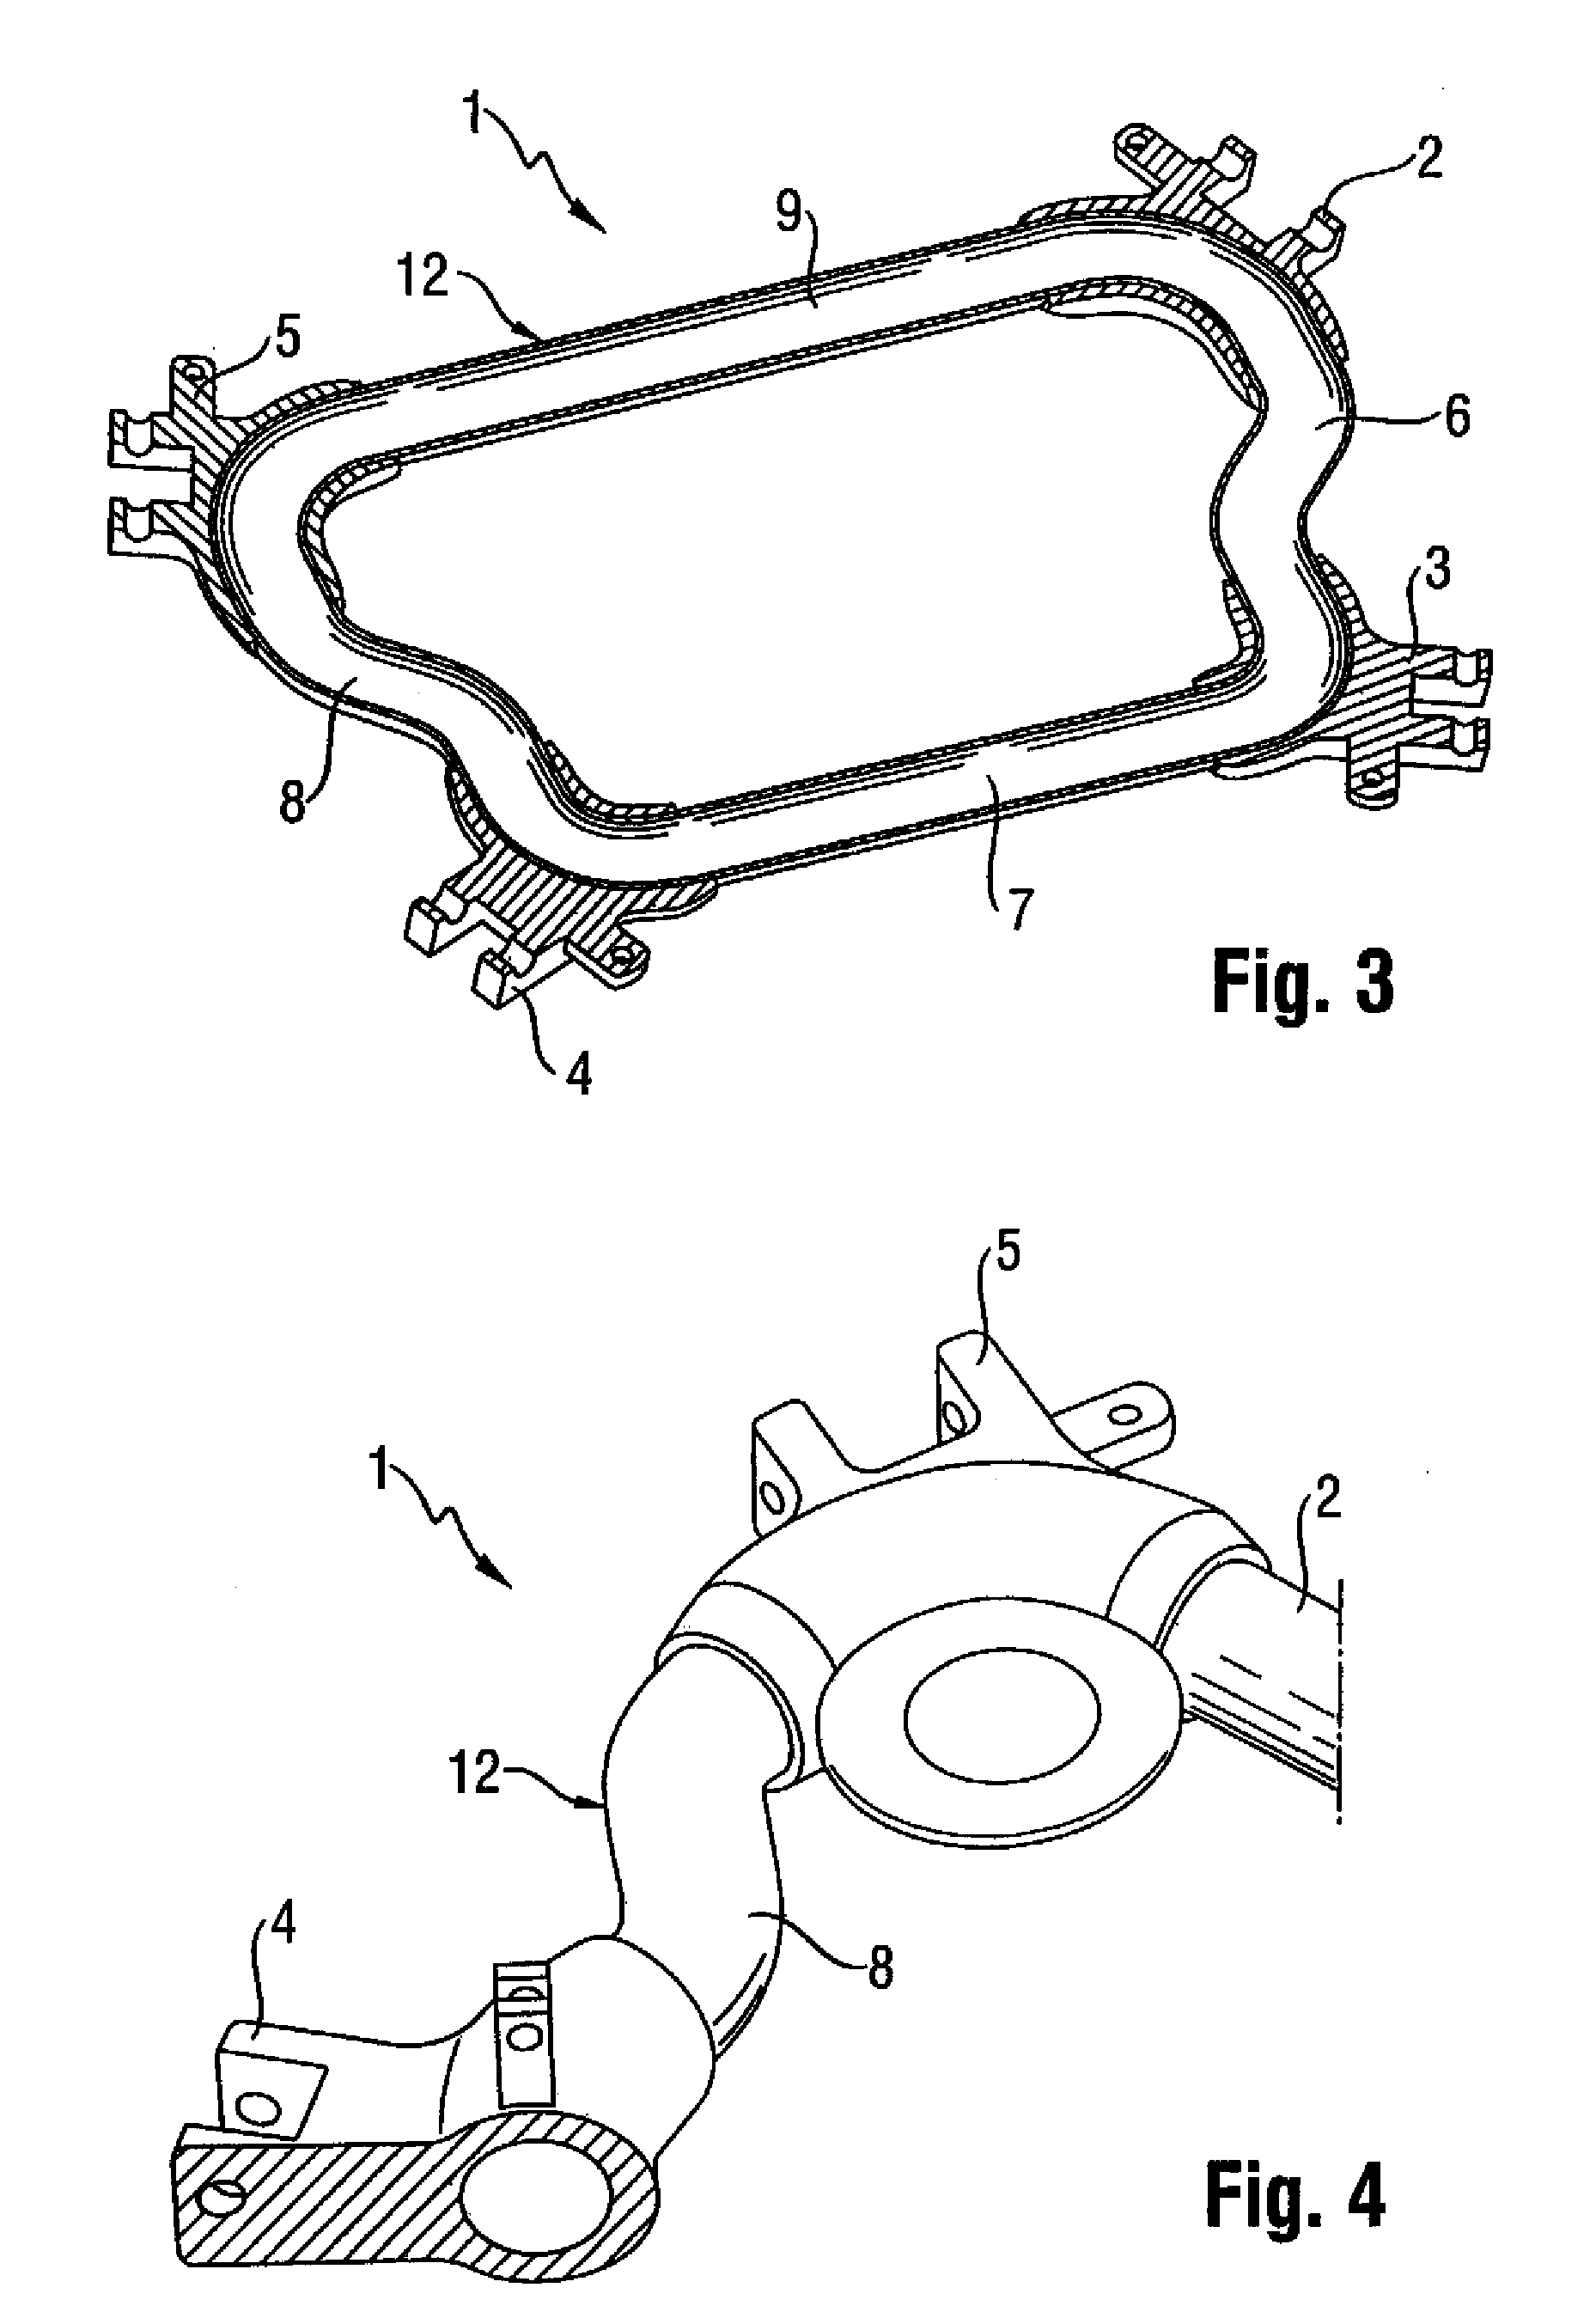 Method of making a subframe of a motor vehicle, and subframe for a motor vehicle